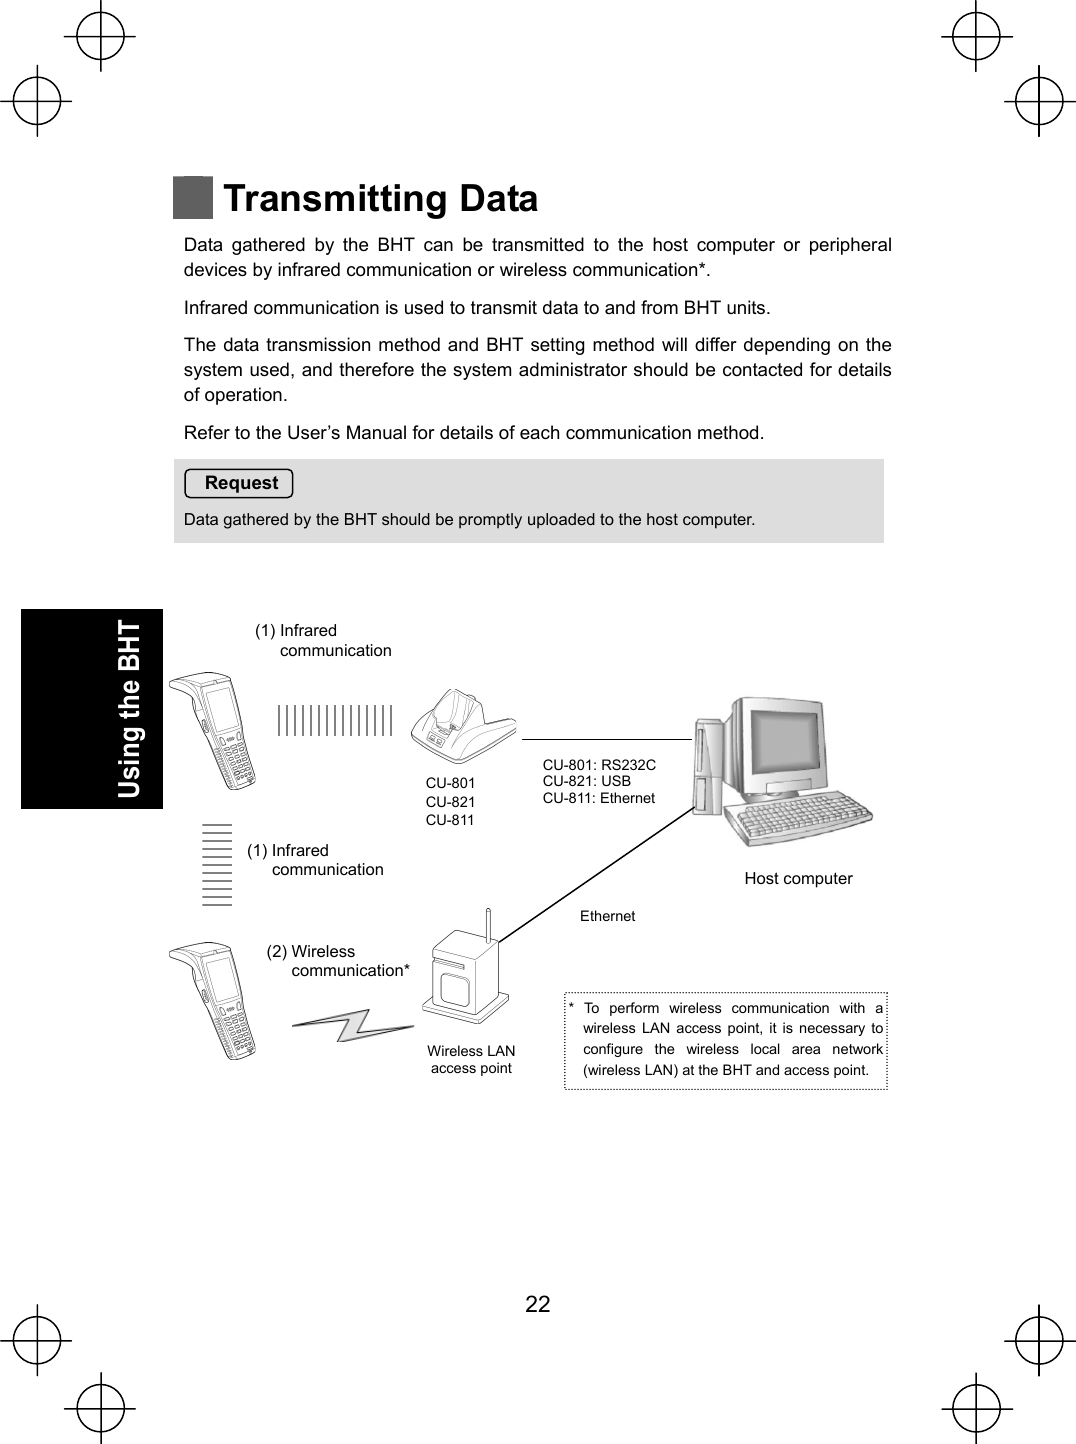  22   Using the BHT   Transmitting Data Data gathered by the BHT can be transmitted to the host computer or peripheral devices by infrared communication or wireless communication*. Infrared communication is used to transmit data to and from BHT units. The data transmission method and BHT setting method will differ depending on the system used, and therefore the system administrator should be contacted for details of operation. Refer to the User’s Manual for details of each communication method.  Request Data gathered by the BHT should be promptly uploaded to the host computer.                        Wireless LAN access pointCU-801 CU-821 CU-811 (1) Infrared   communication(2) Wireless   communication*CU-801: RS232CCU-821: USB CU-811: EthernetEthernet (1) Infrared   communicationHost computer* To perform wireless communication with a wireless LAN access point, it is necessary to configure the wireless local area network (wireless LAN) at the BHT and access point.